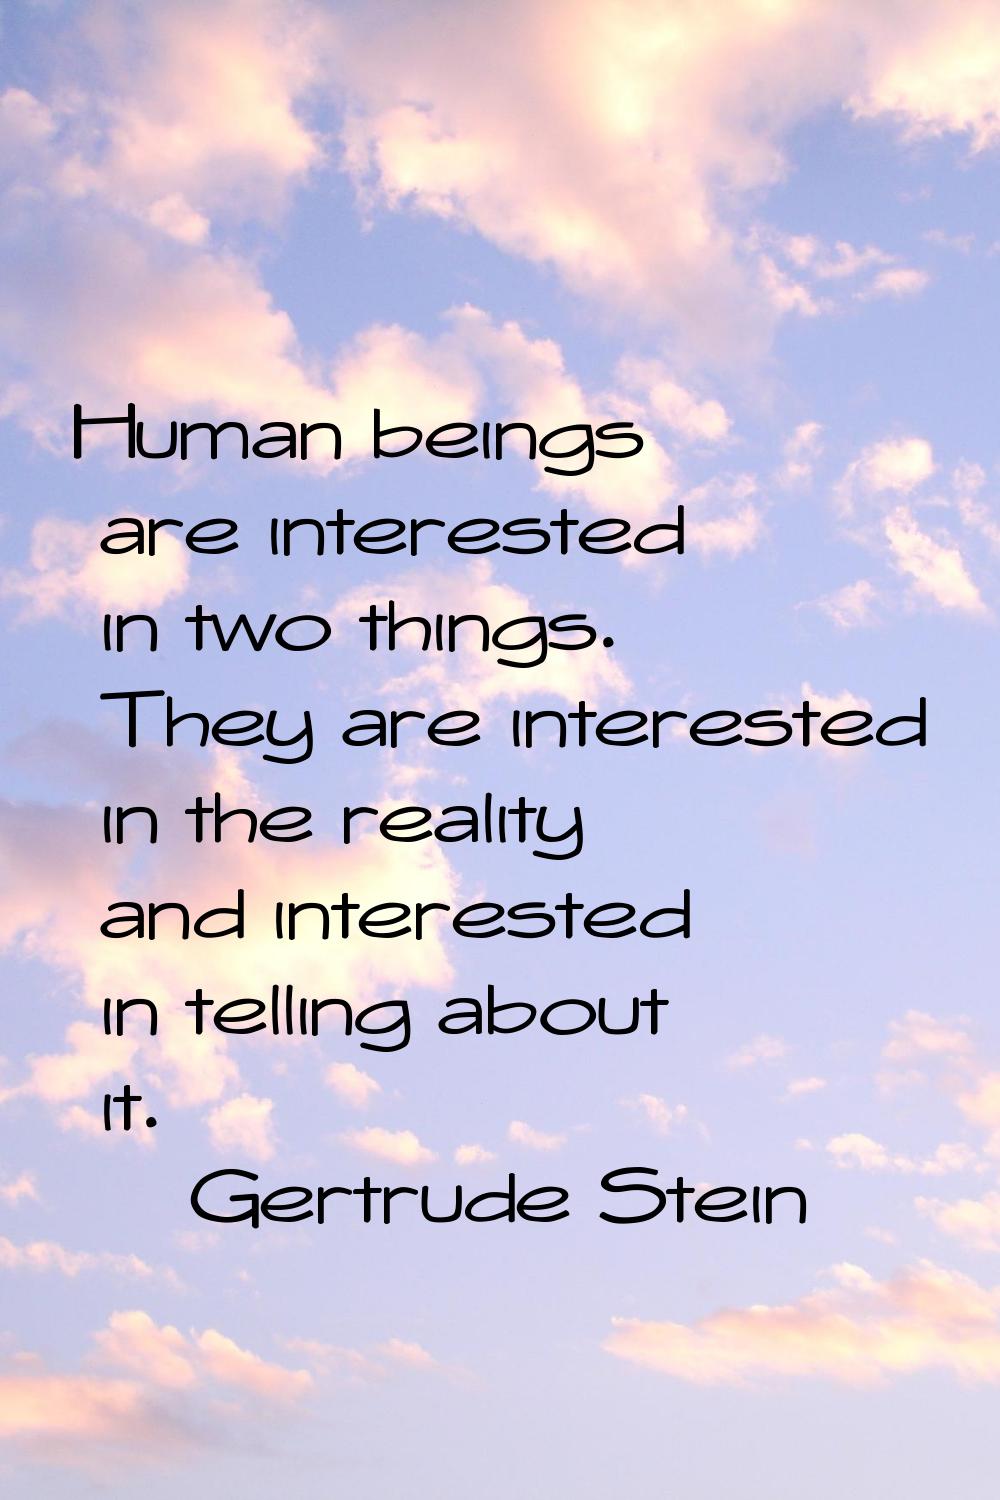 Human beings are interested in two things. They are interested in the reality and interested in tel